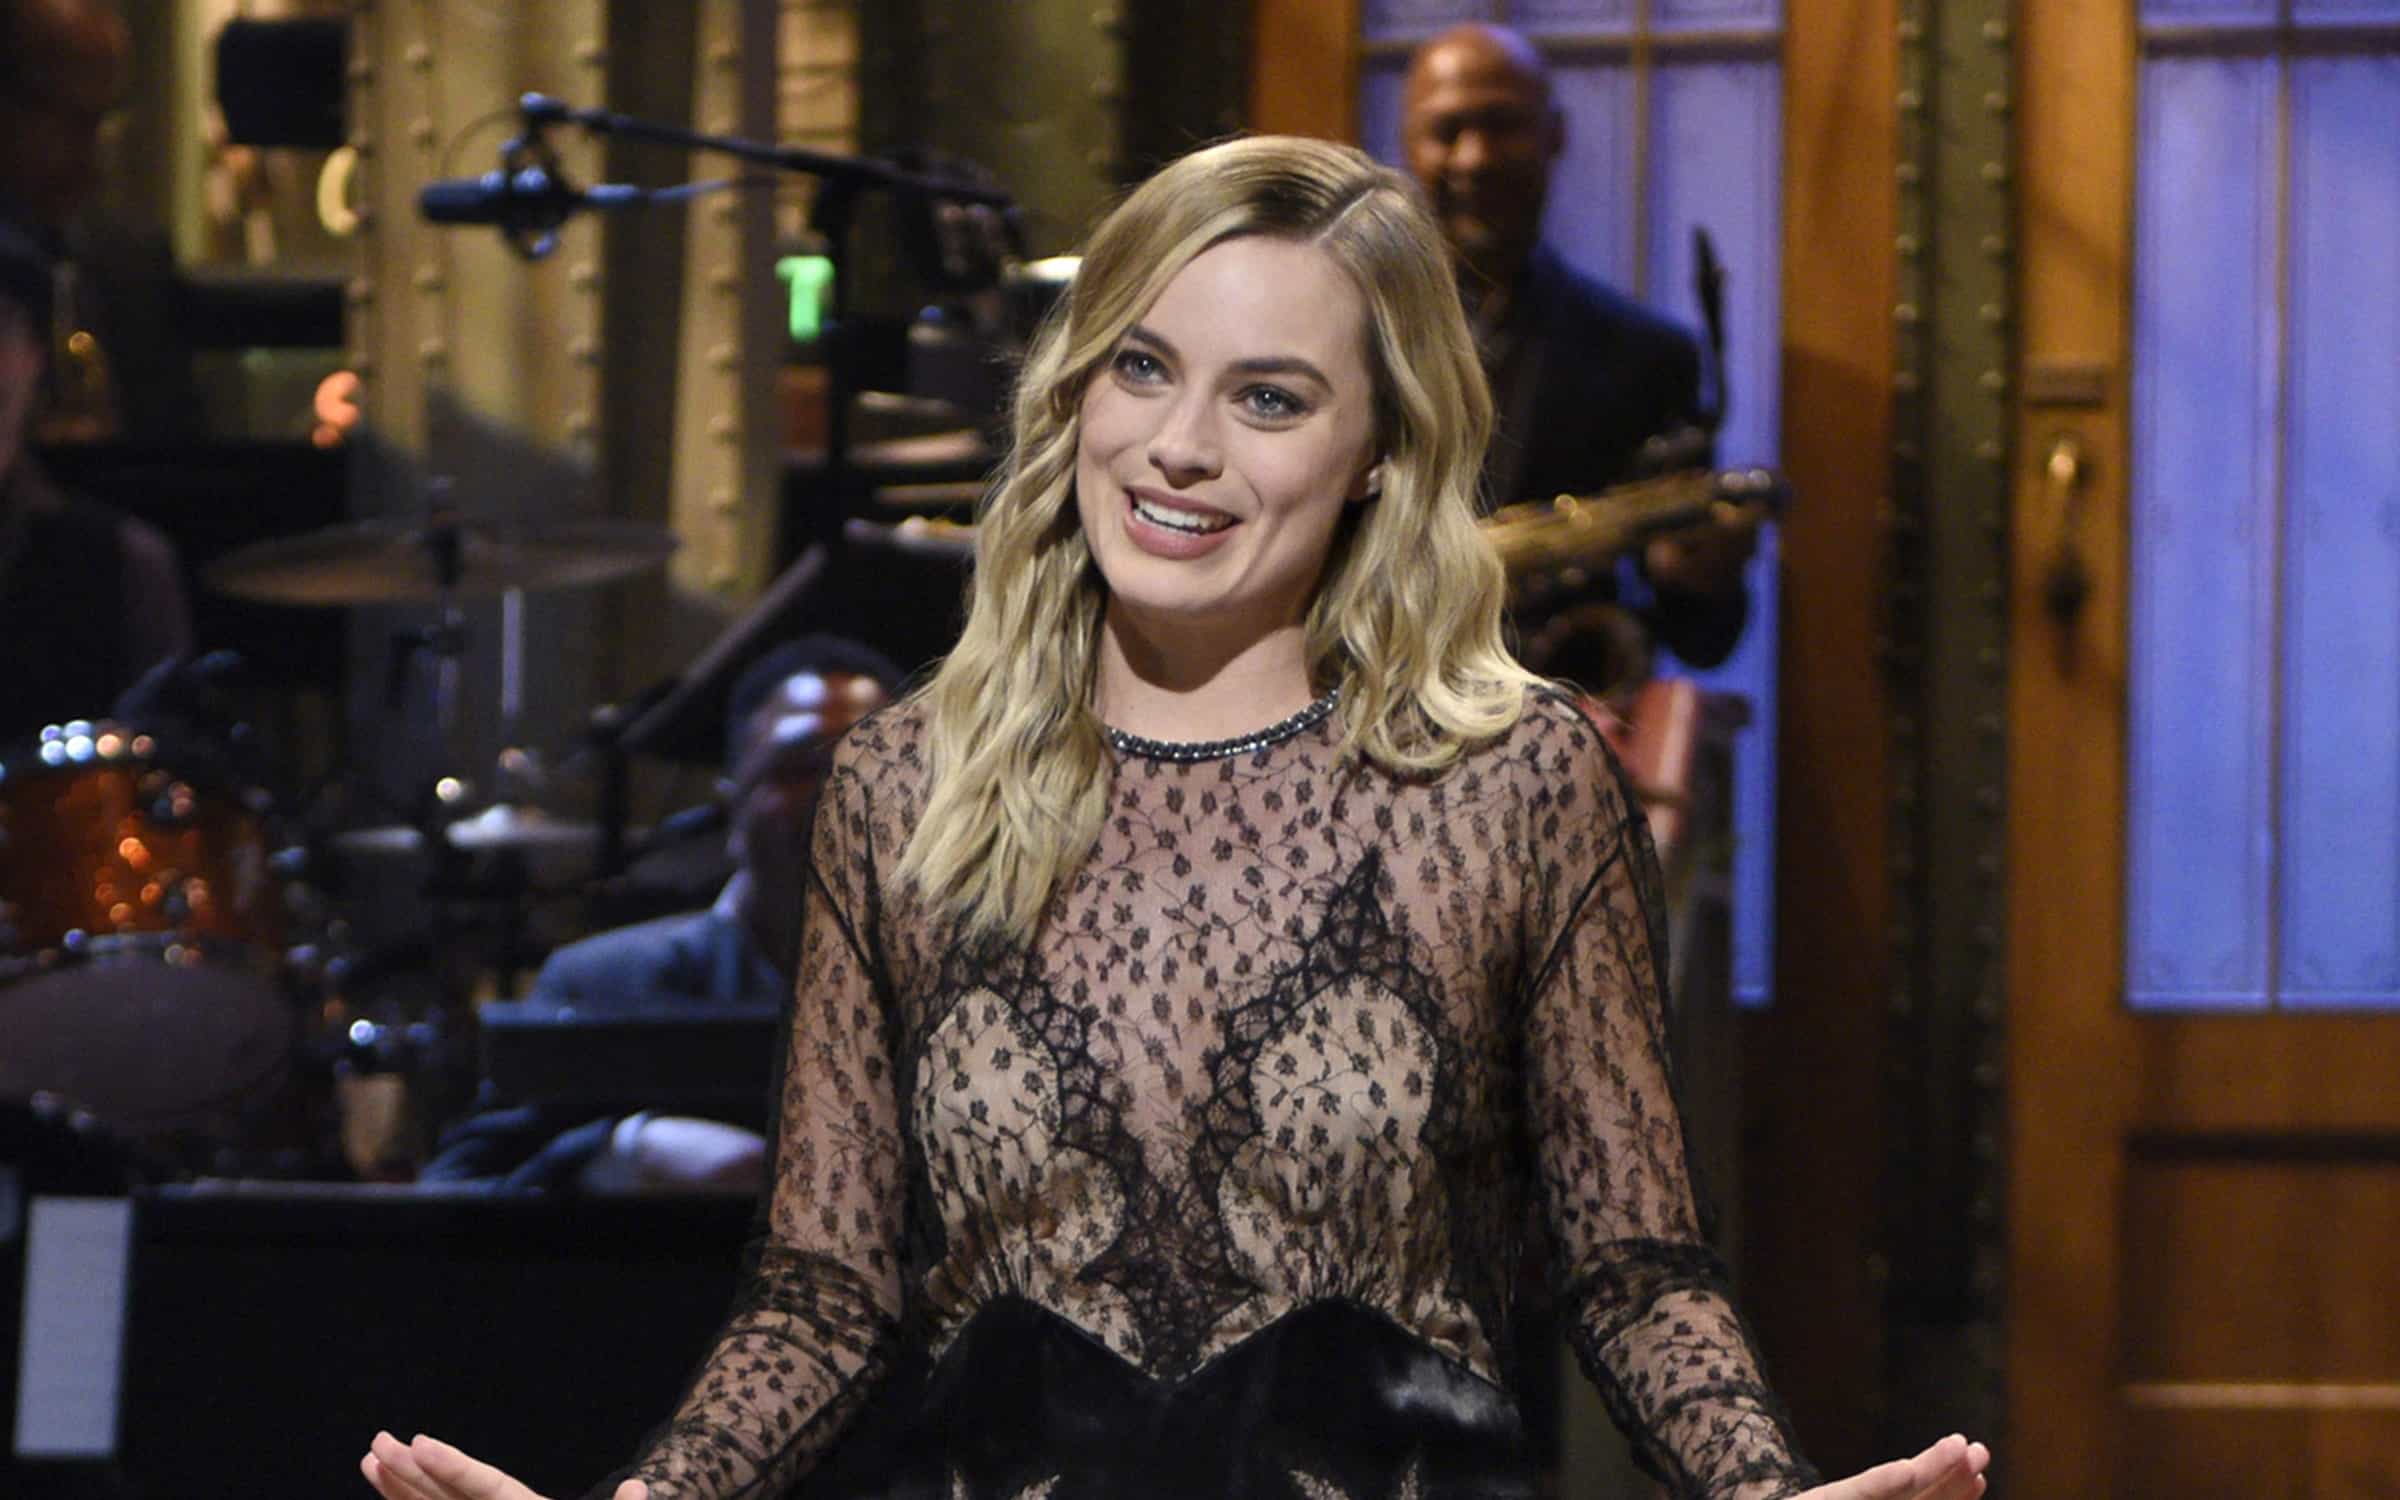 Saturday Night Live returned for its 42nd season this past weekend